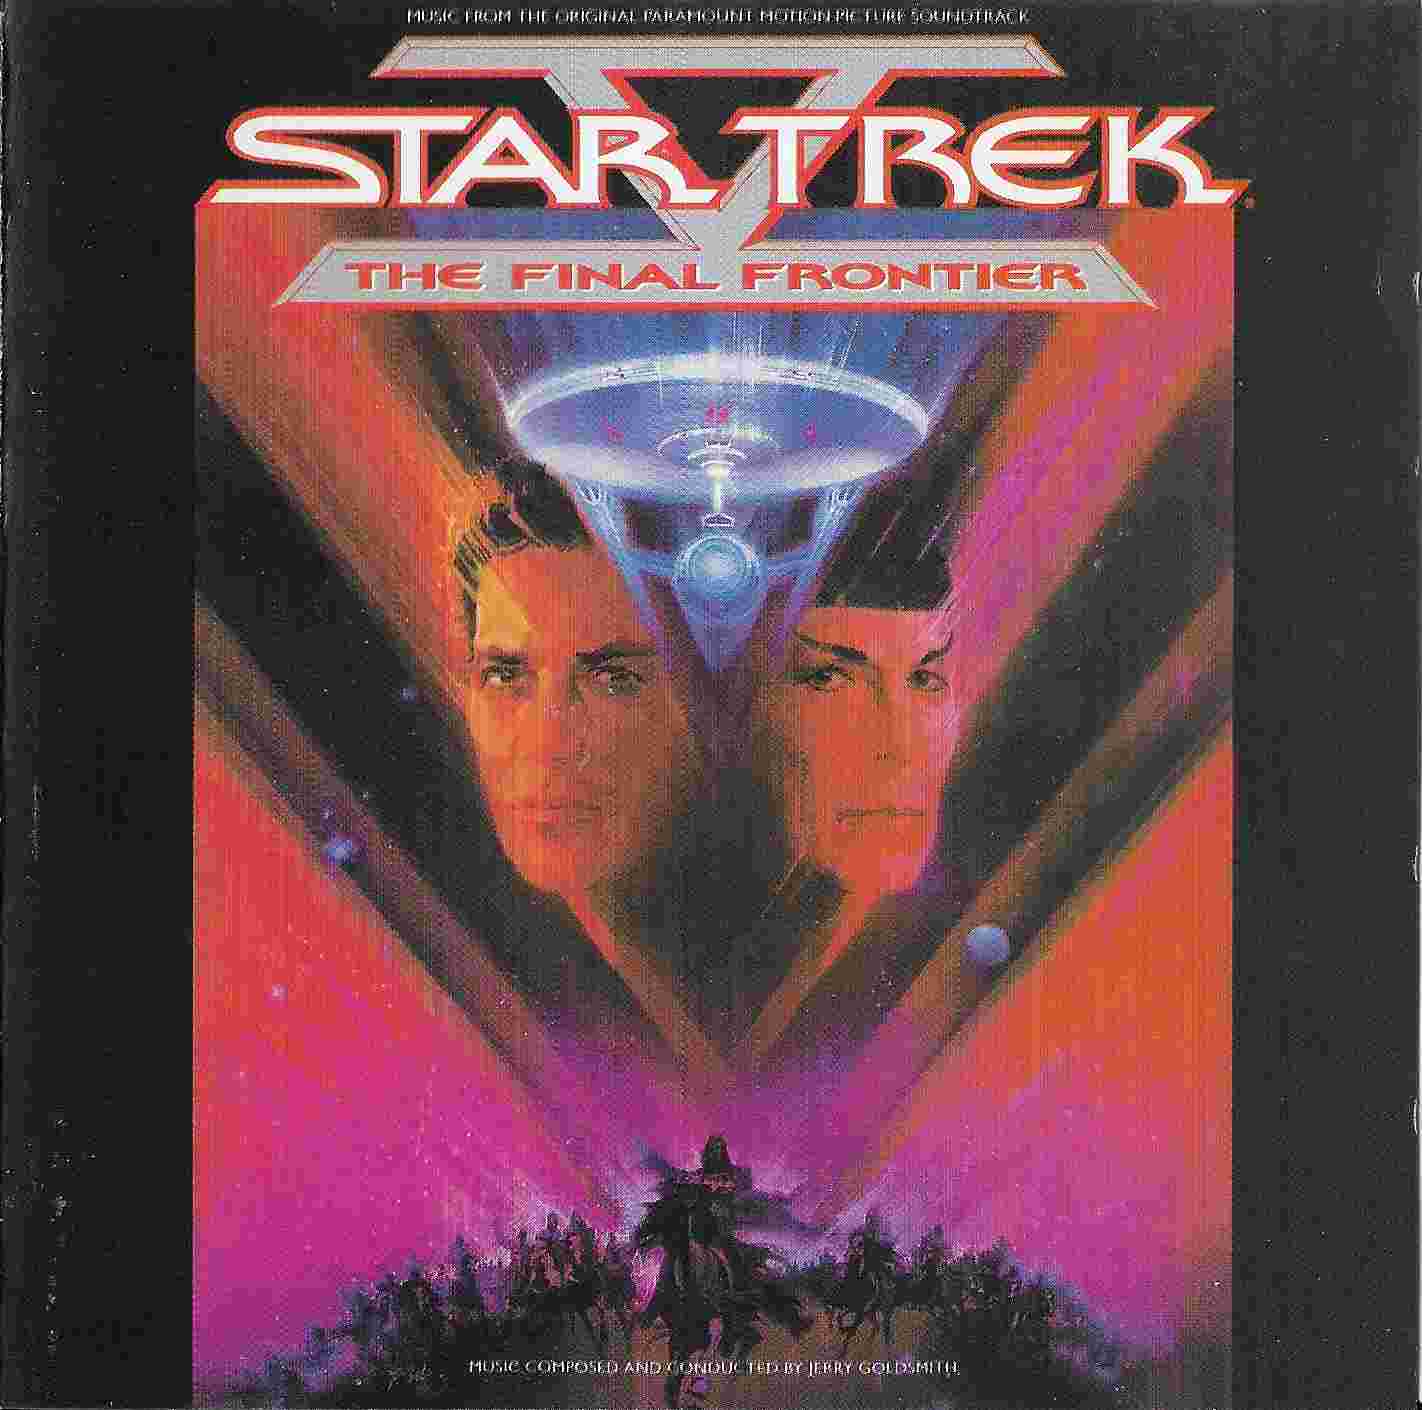 Picture of 495925 2 Star trek V by artist Jerry Goldsmith from the BBC cds - Records and Tapes library